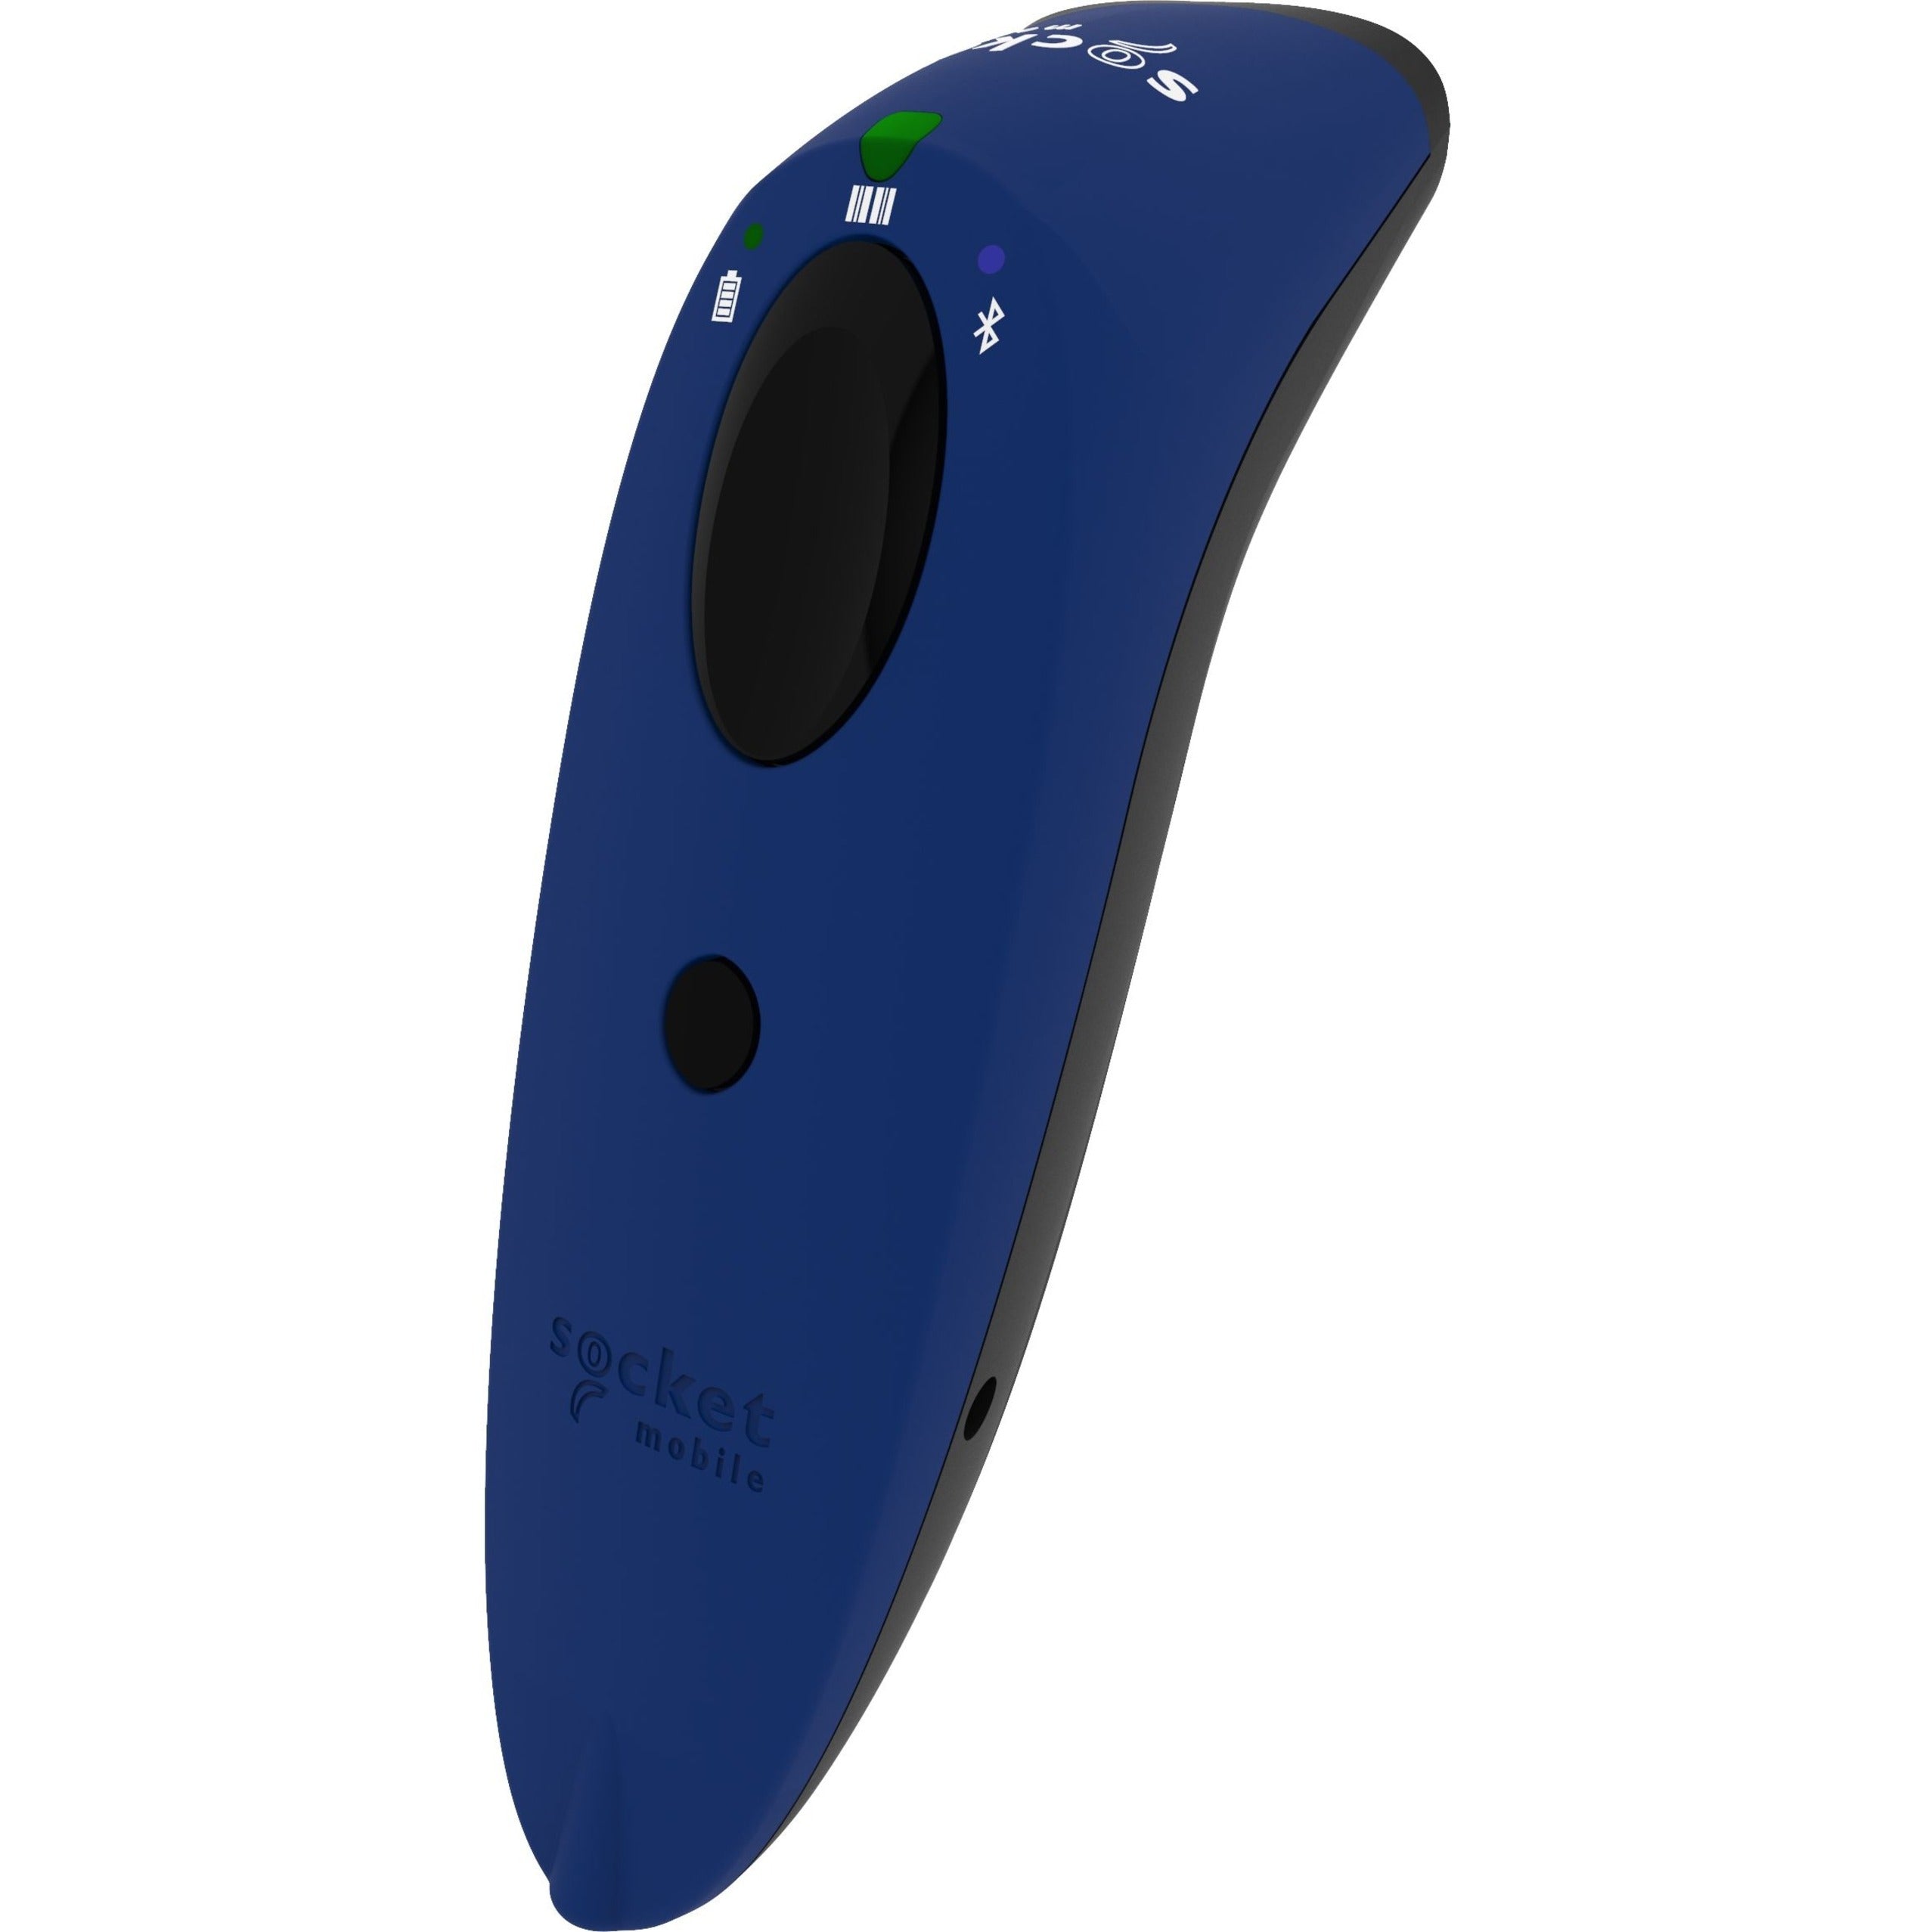 Socket Mobile CX3974-3031 SocketScan S720, Blue - Wireless Barcode Scanner for Transportation, Asset Tracking, Hospitality, and More